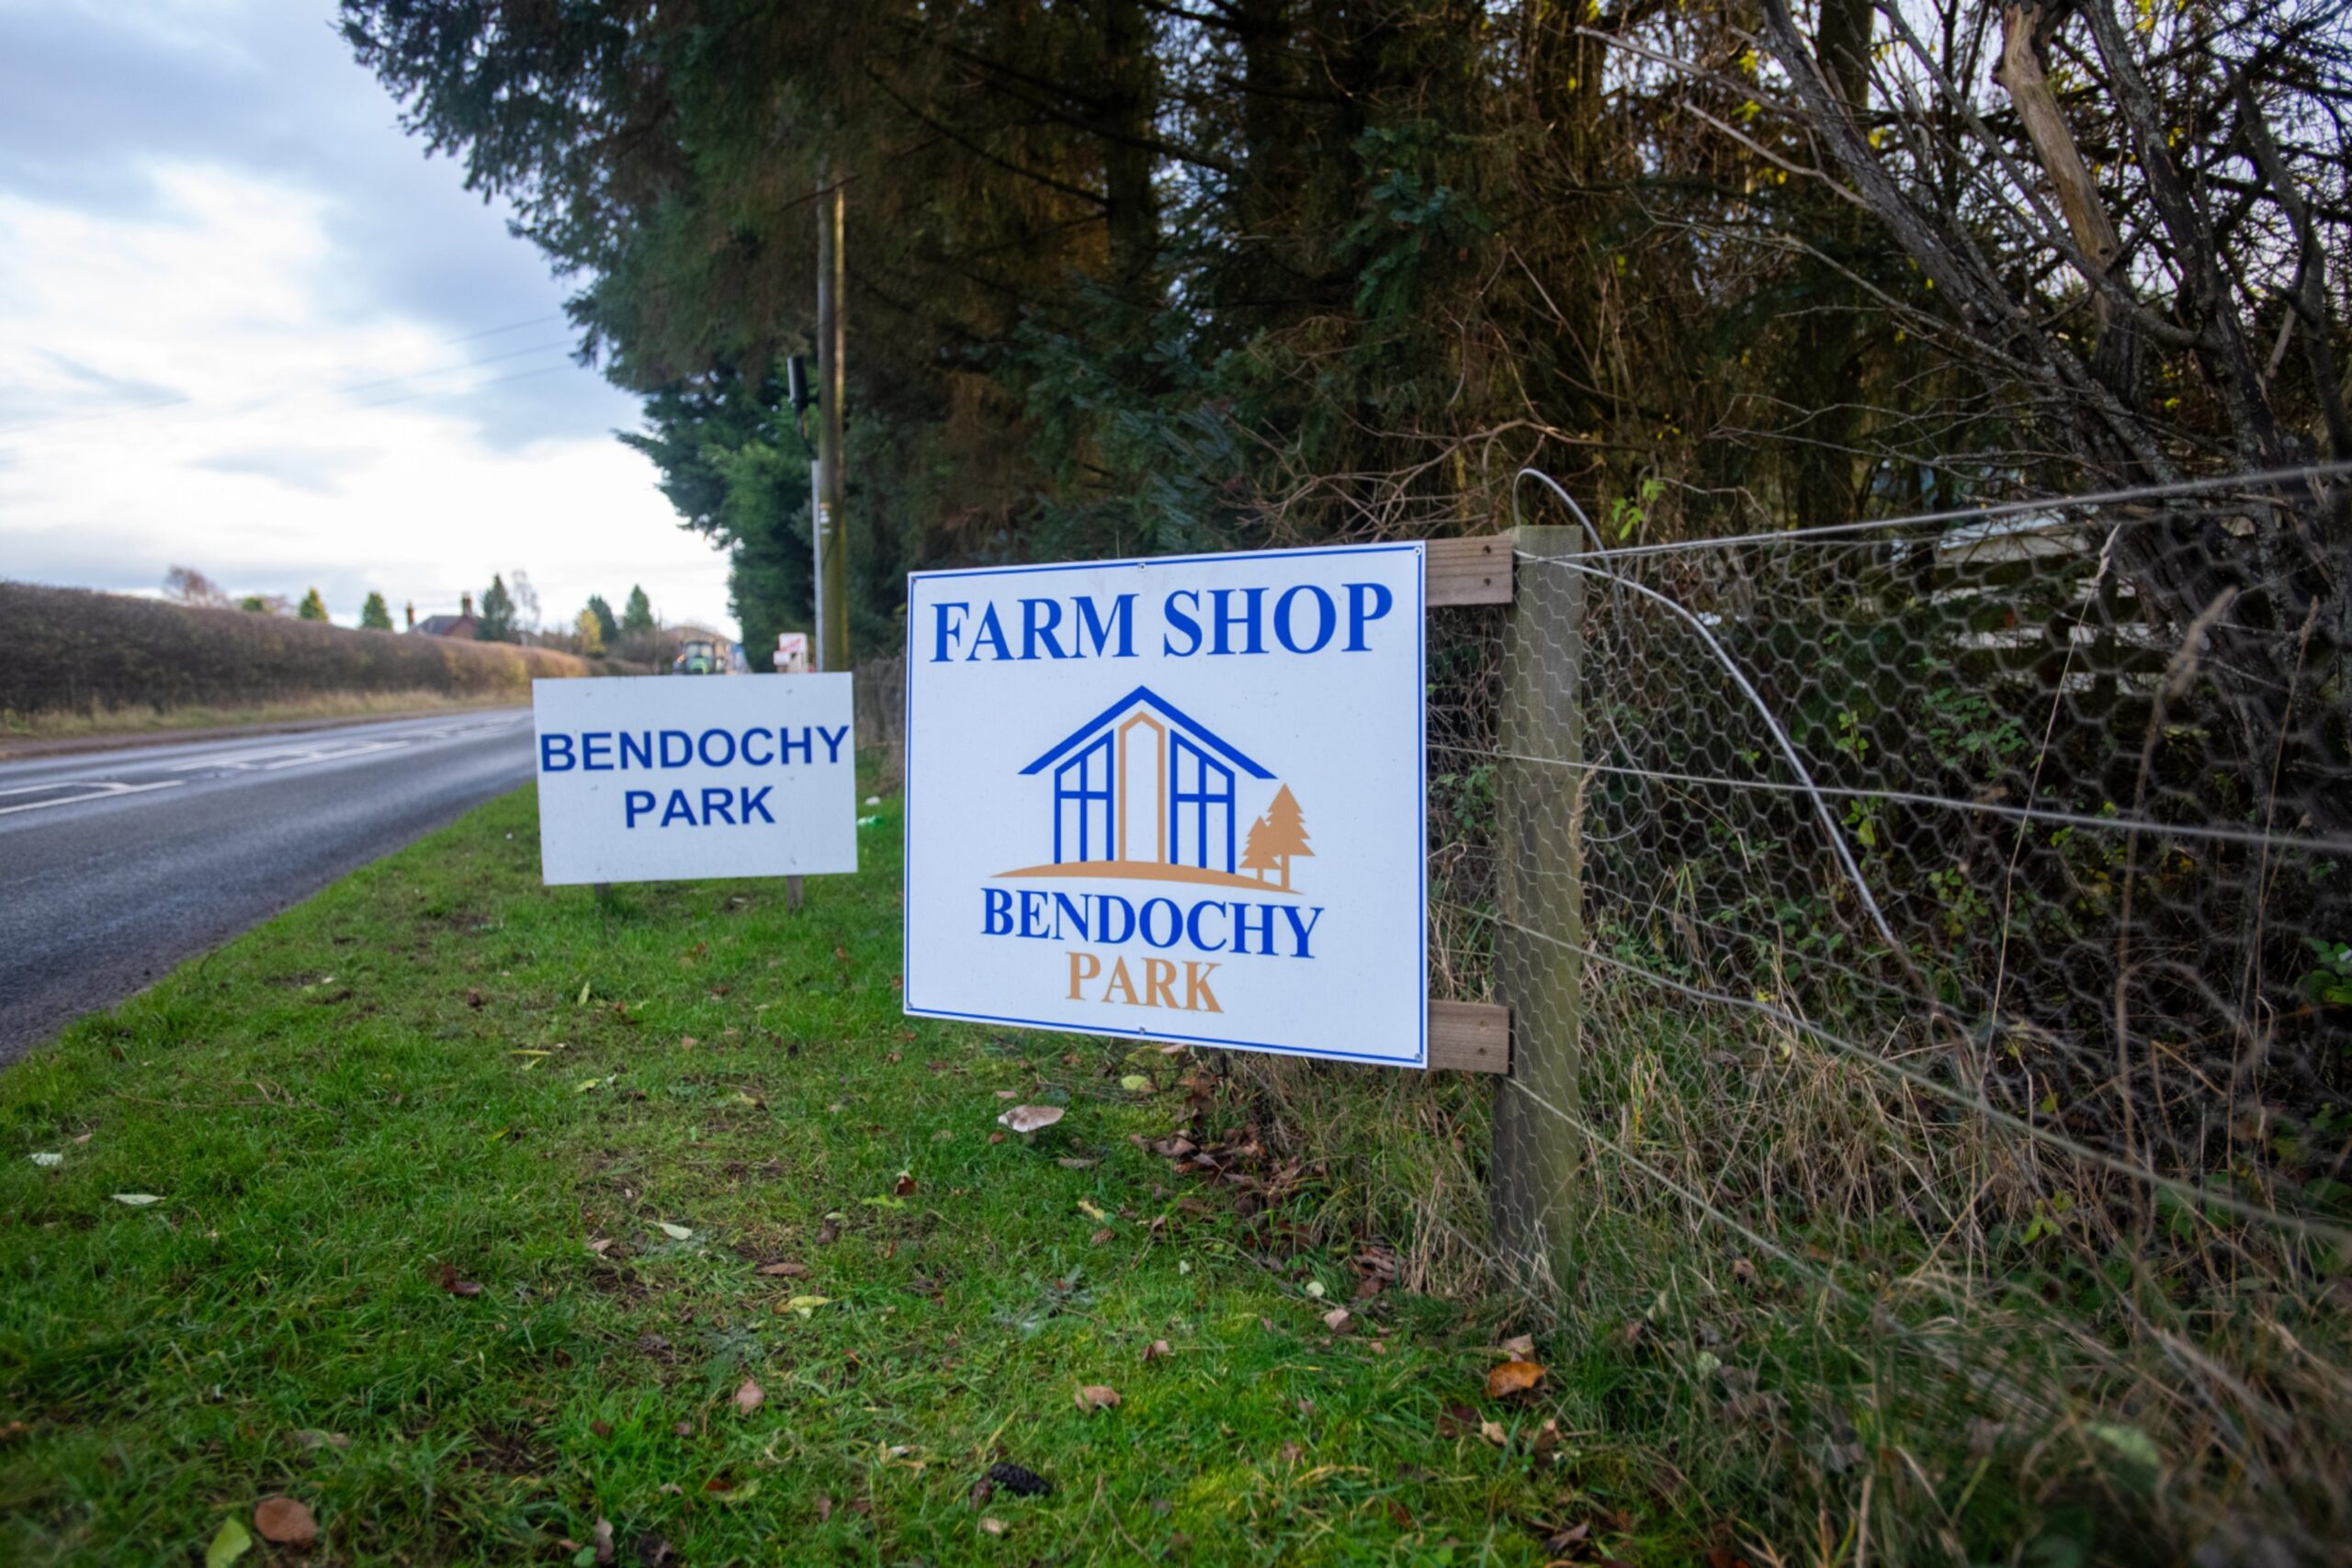 The Barrie Box farm shop at Bendochy Park.